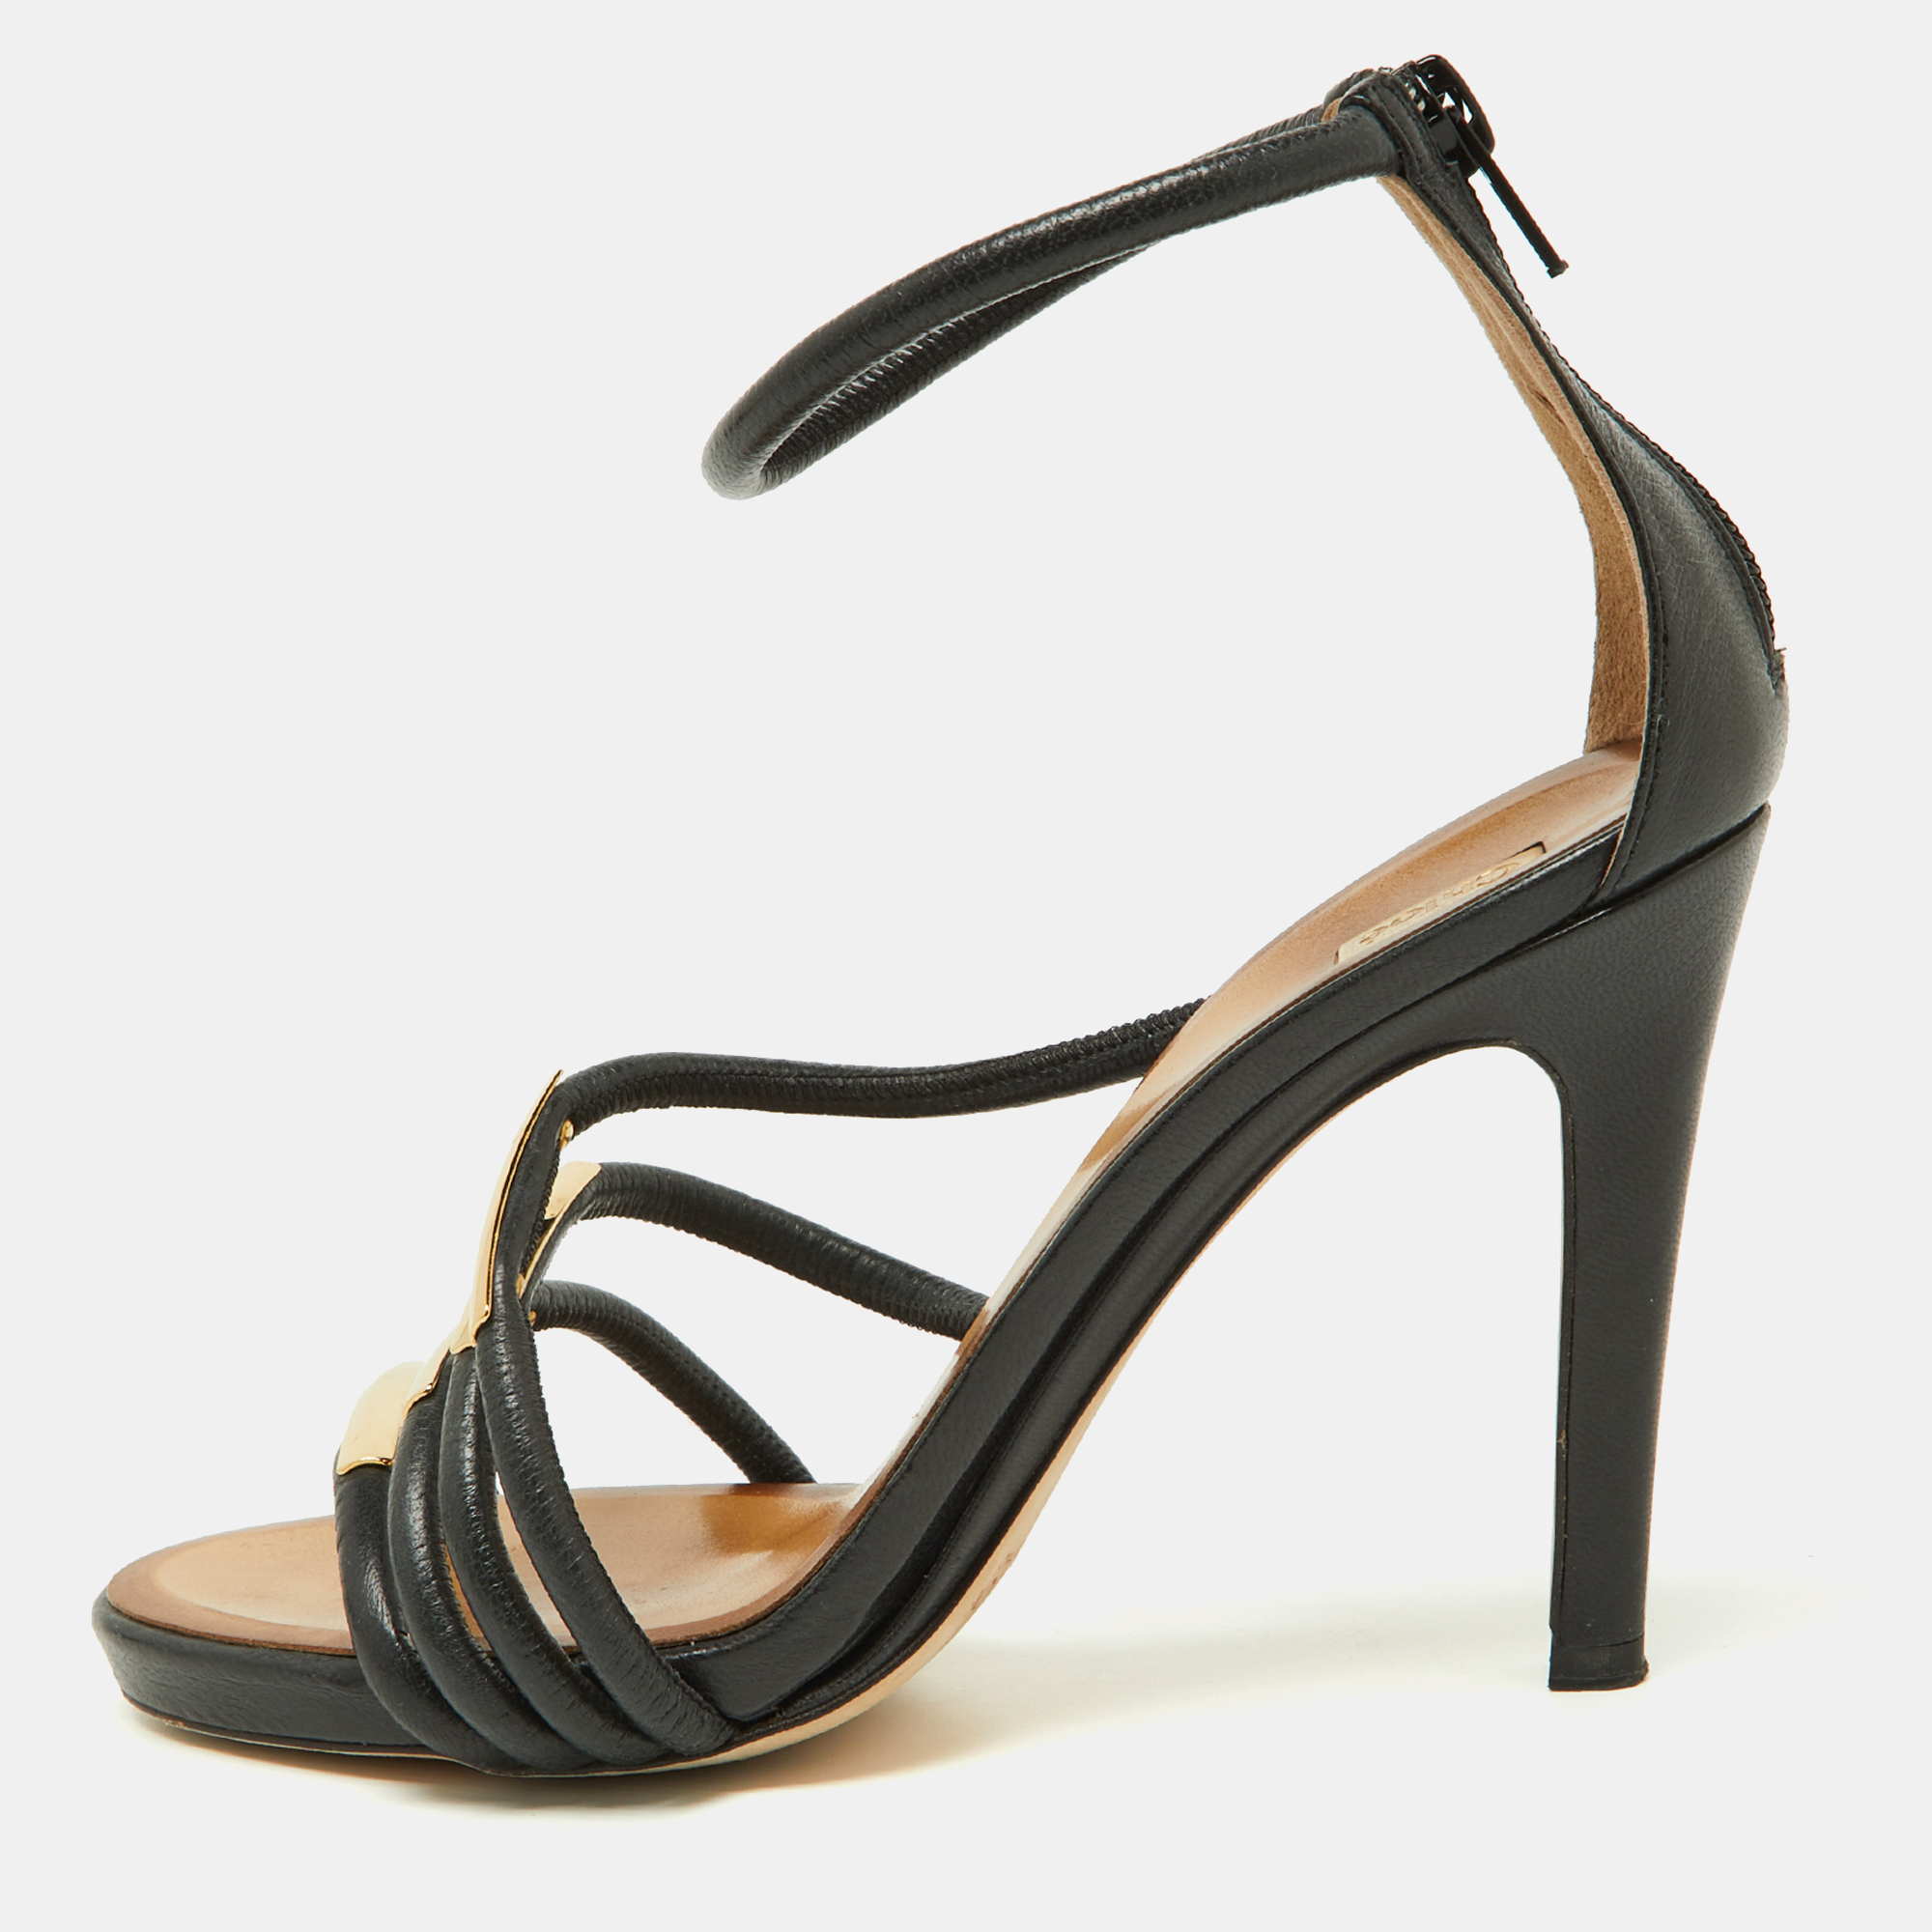 Chloe black leather strappy ankle strap sandals size 38